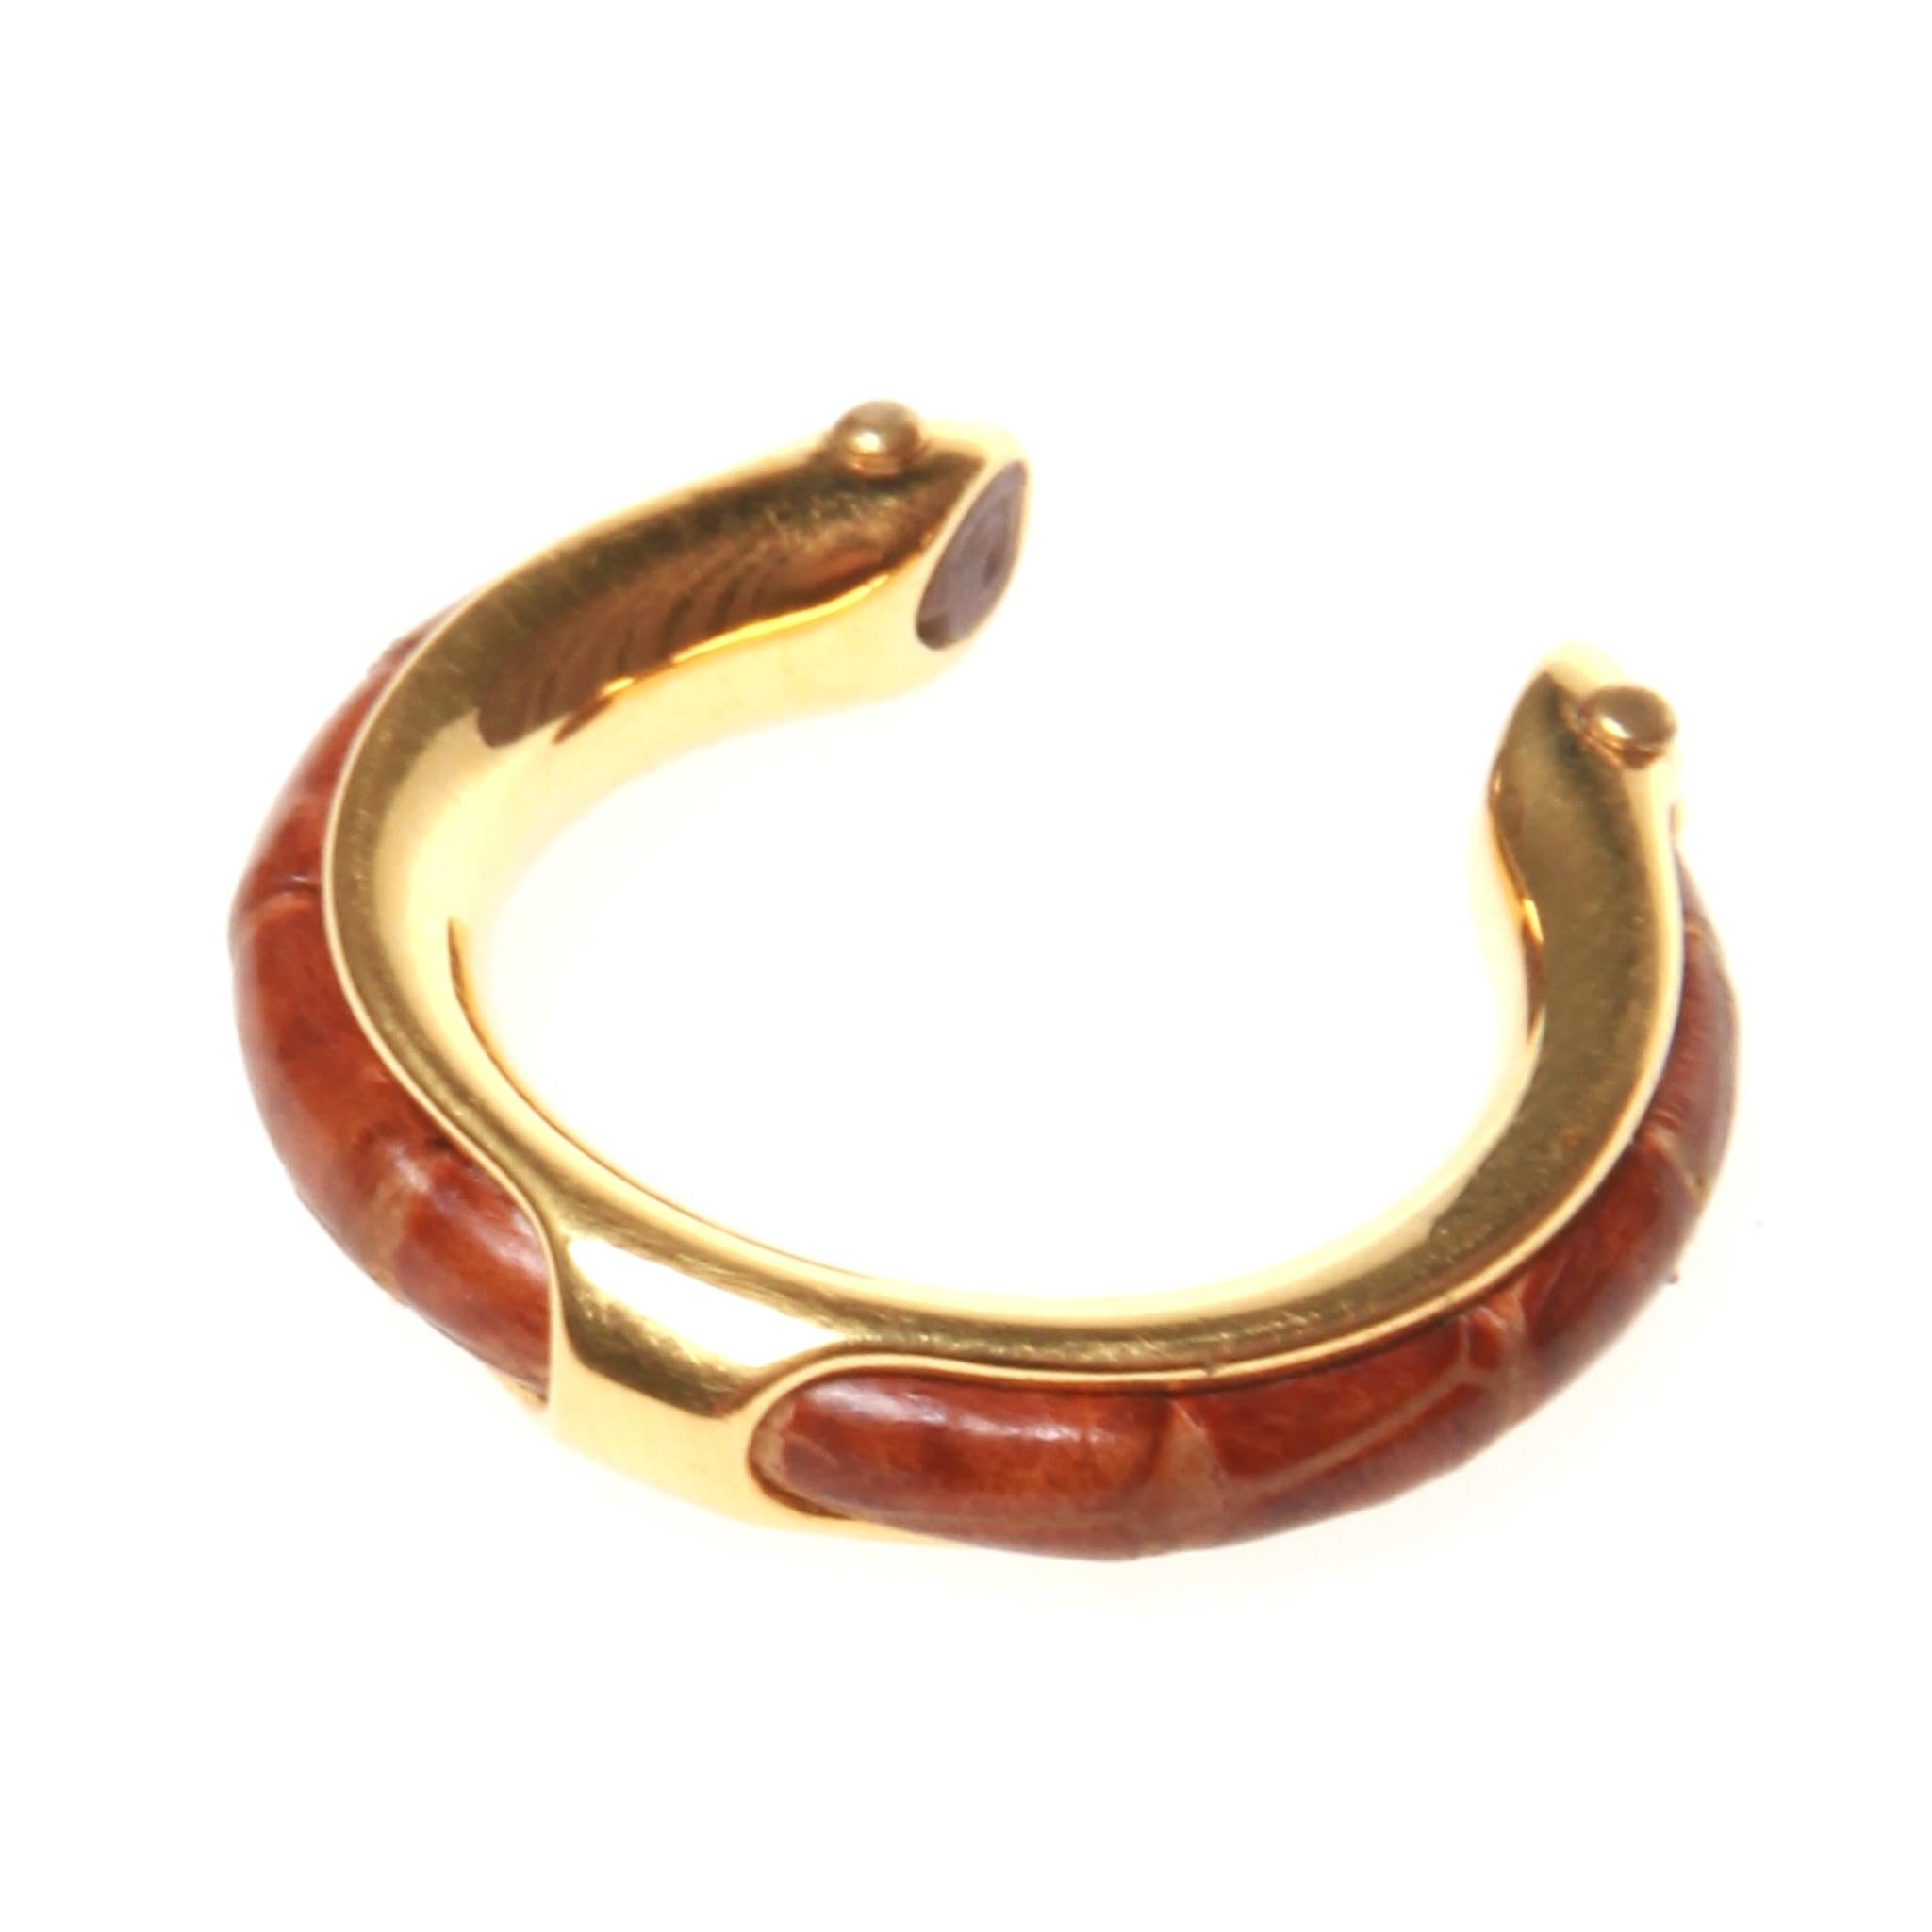 Hermes Paris gold horseshoe ring with a brown lizard leather detail.